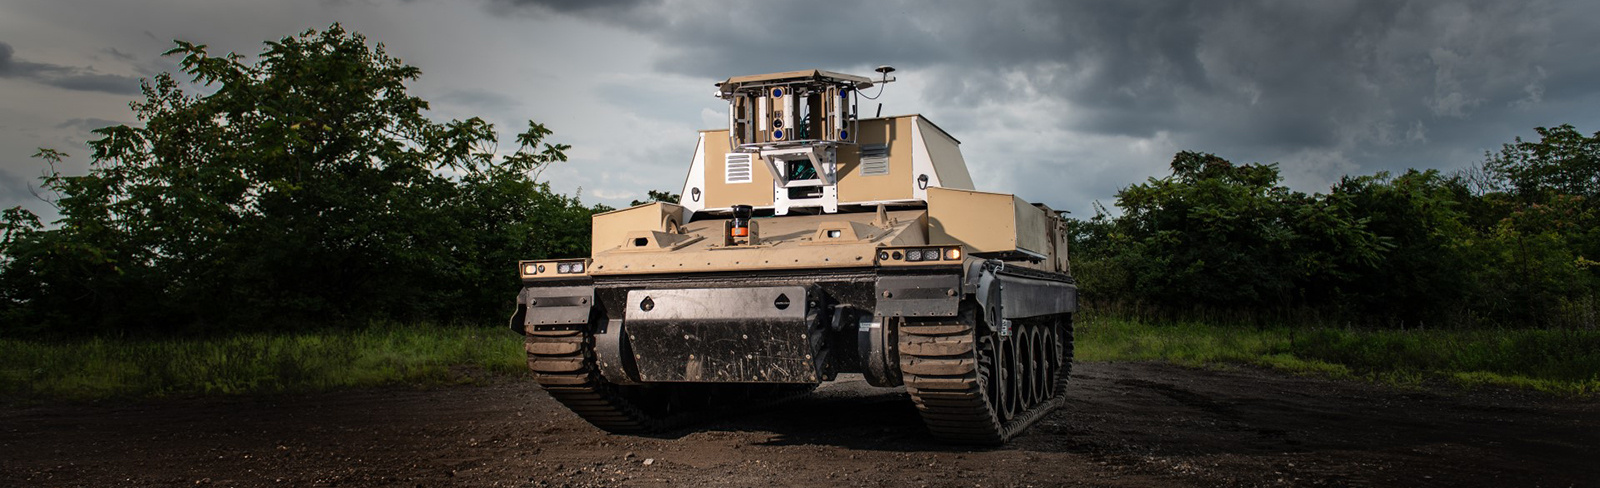 Mobile, lethal and innovative, the Robotic Technology Demonstrator (RTD) delivers an autonomous combat vehicle solution that revolutionizes the future of the battlefield for the U.S. Army.